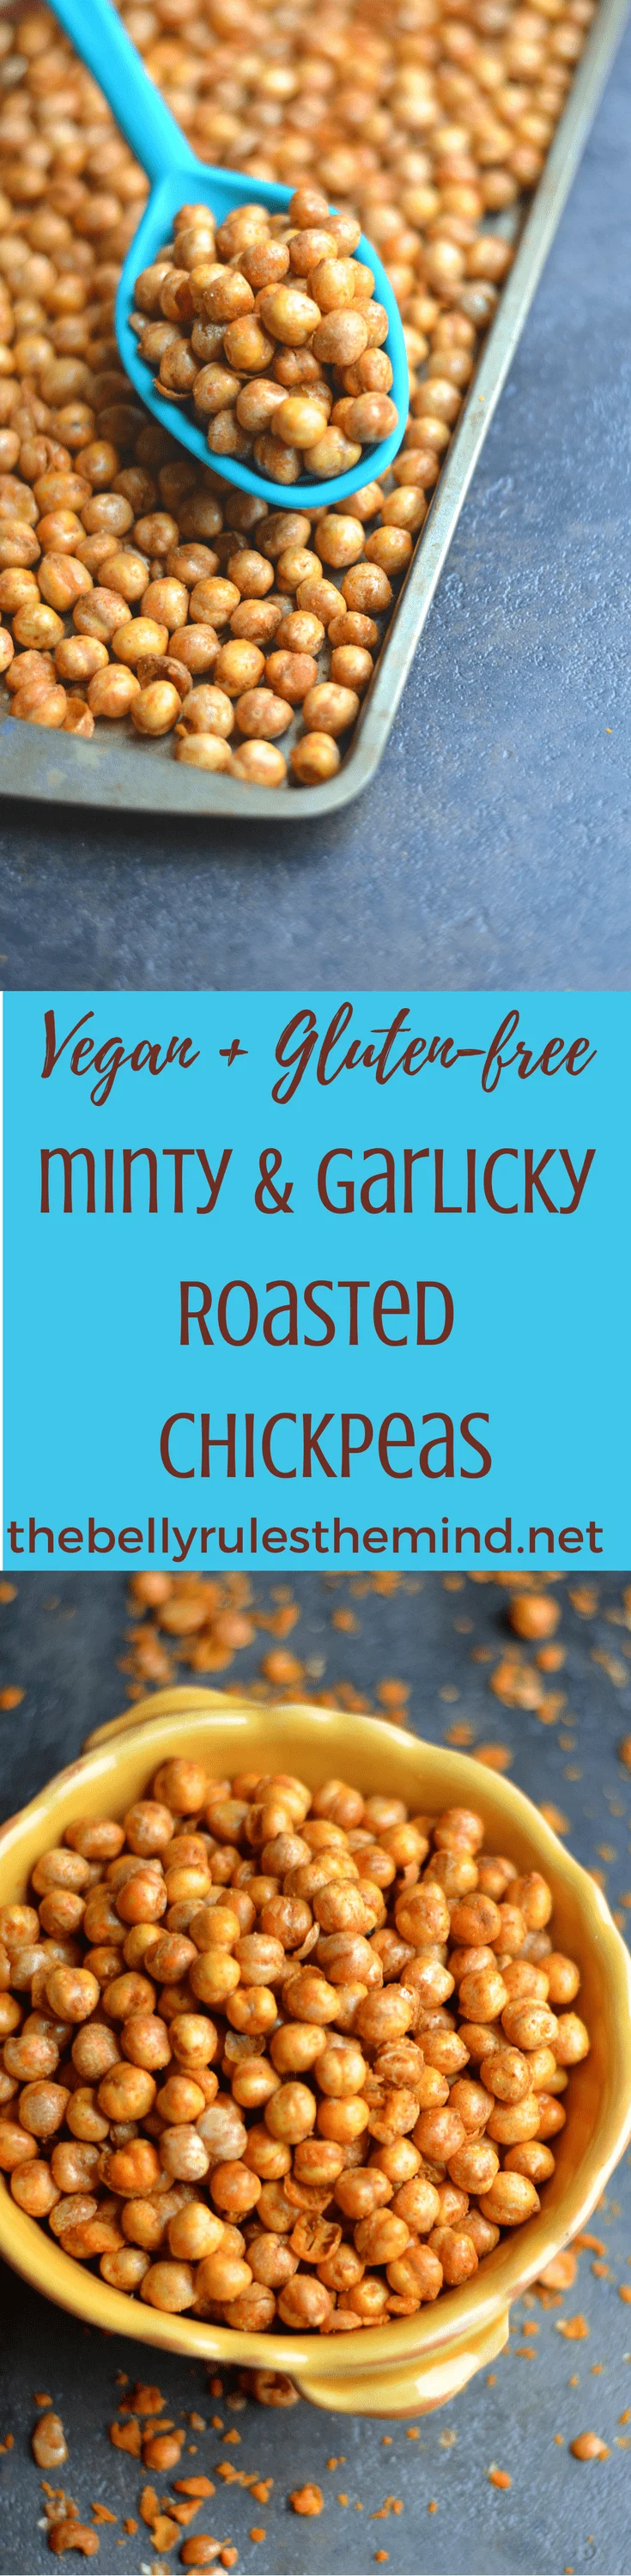  Minty & Garlicky Roasted Chickpeas-If you're looking for a healthy snack to satisfy that mid-day, salty, crunchy craving, then these Minty & Garlicky Roasted Chickpeas are the go-to recipe!.Vegan.|https://www.thebellyrulestheind.net @bellyrulesdmind